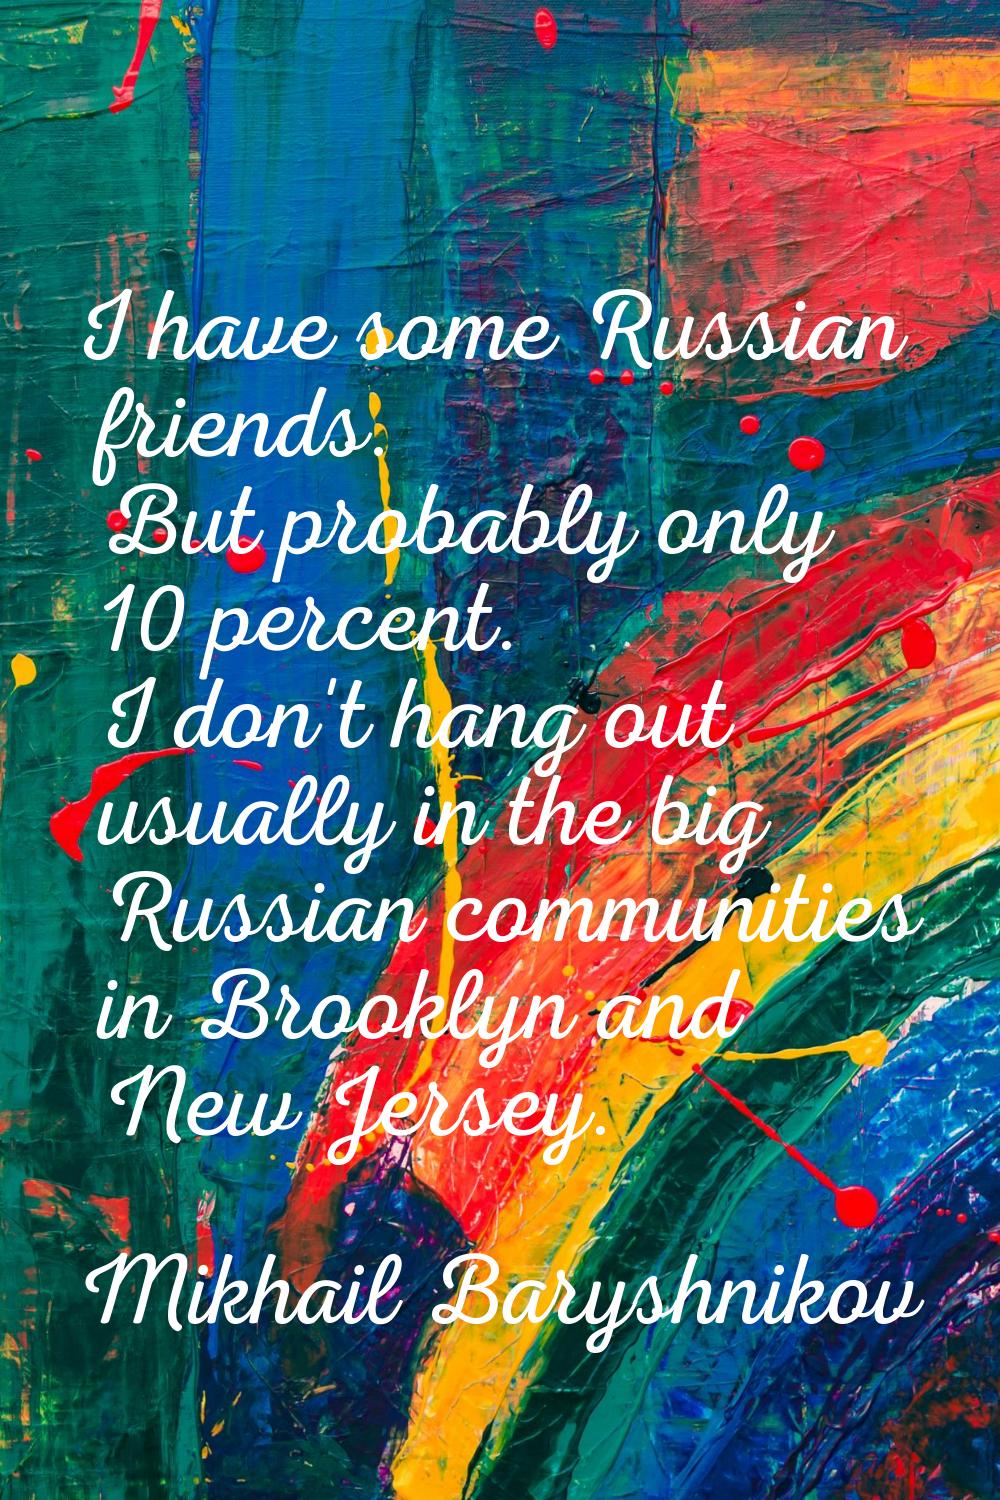 I have some Russian friends. But probably only 10 percent. I don't hang out usually in the big Russ